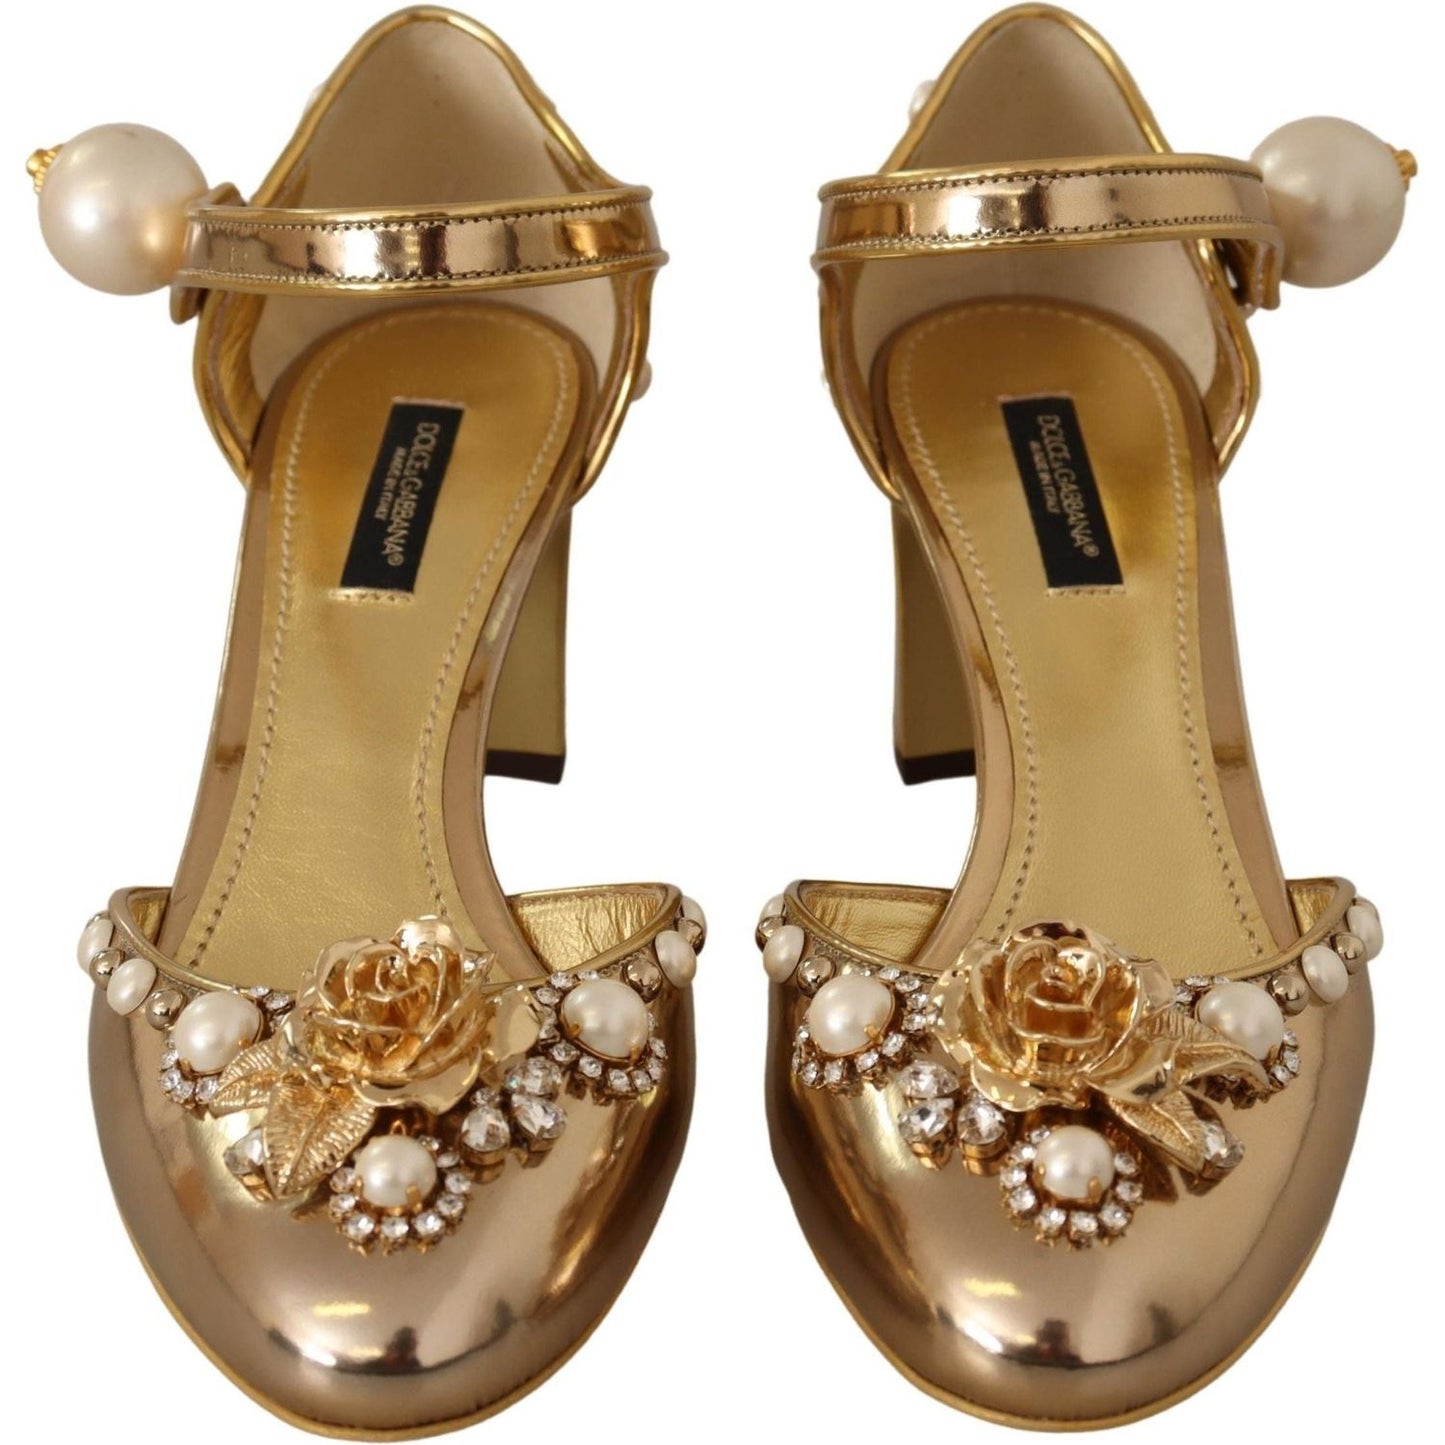 Dolce & Gabbana Elegant Gold Leather Block Heels with Crystals gold-leather-studded-crystal-ankle-strap-shoes IMG_6003-676d531c-fb4.jpg